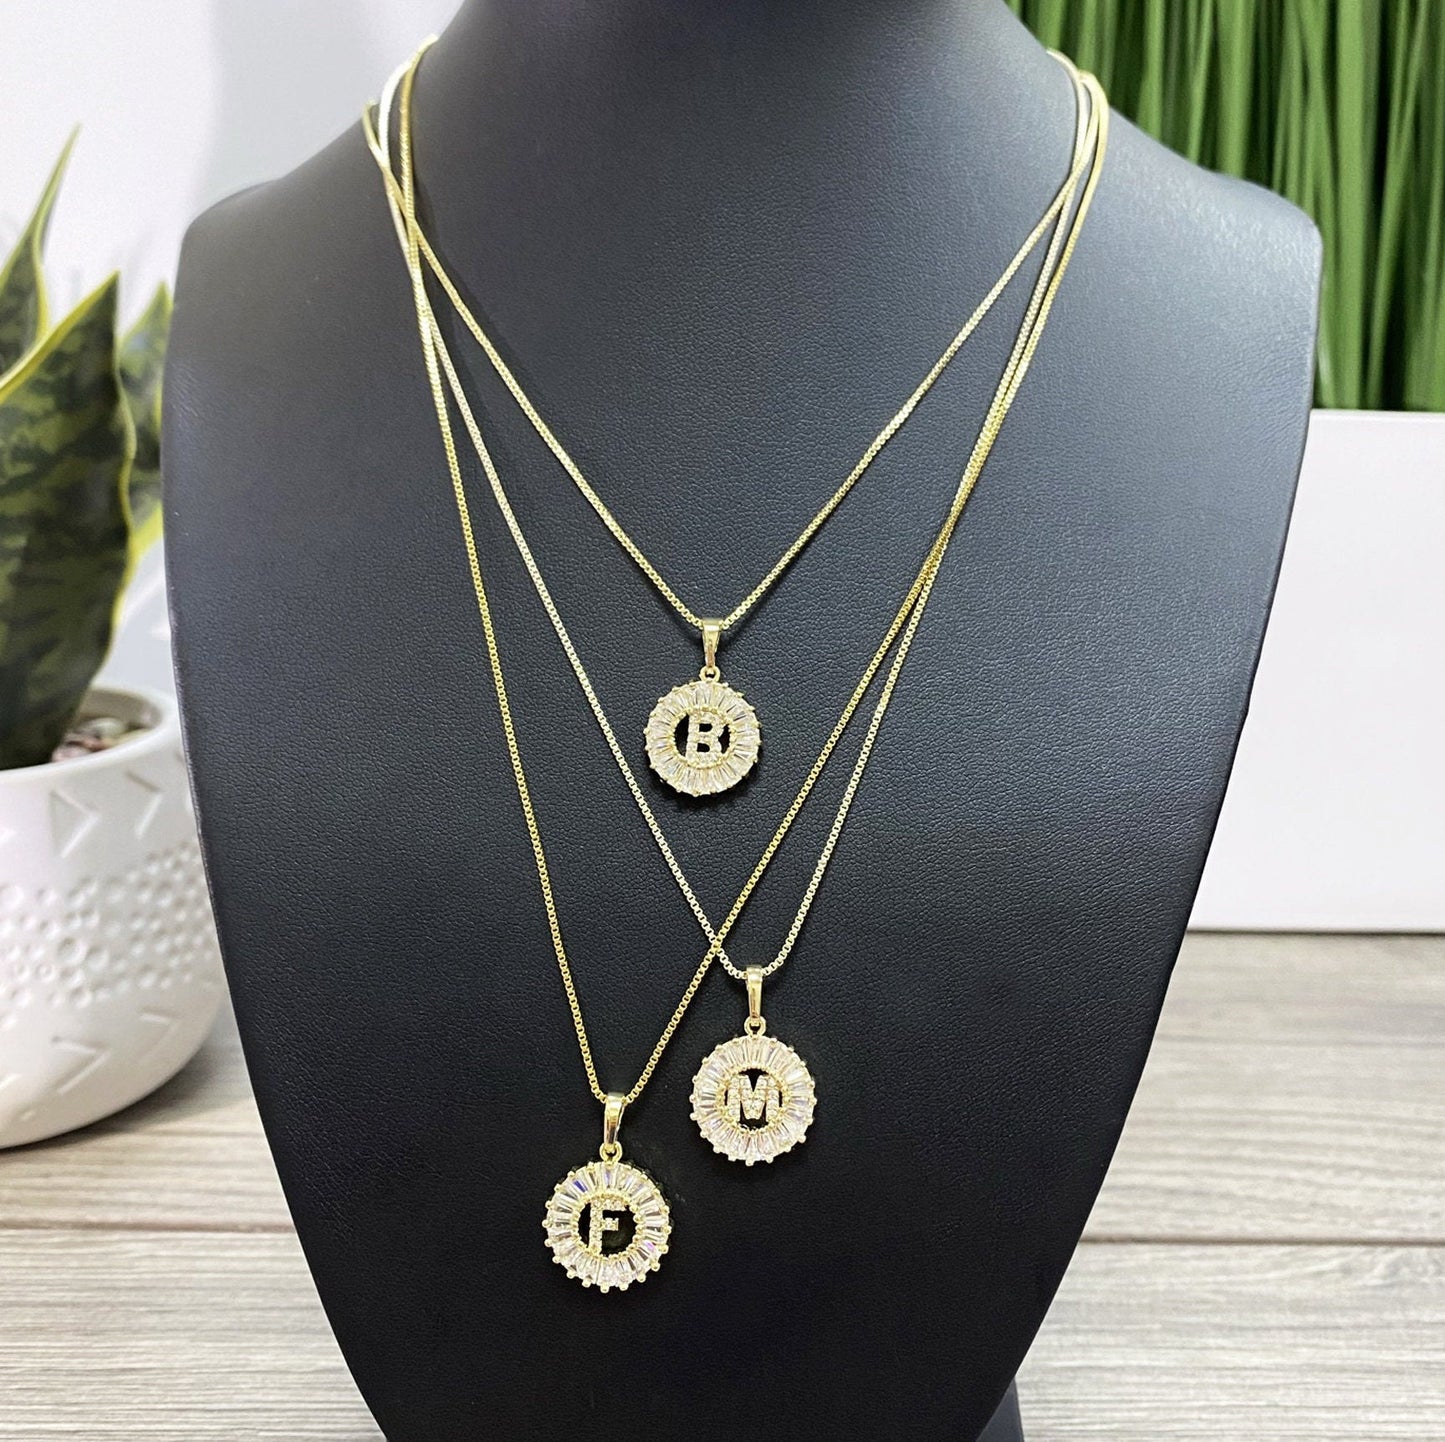 18k Gold Filled Fancy Medium Initials Featuring Baguette Cubic Zirconia Pendant In A Box Chain Necklace  Wholesale Jewelry Supplies - Silver